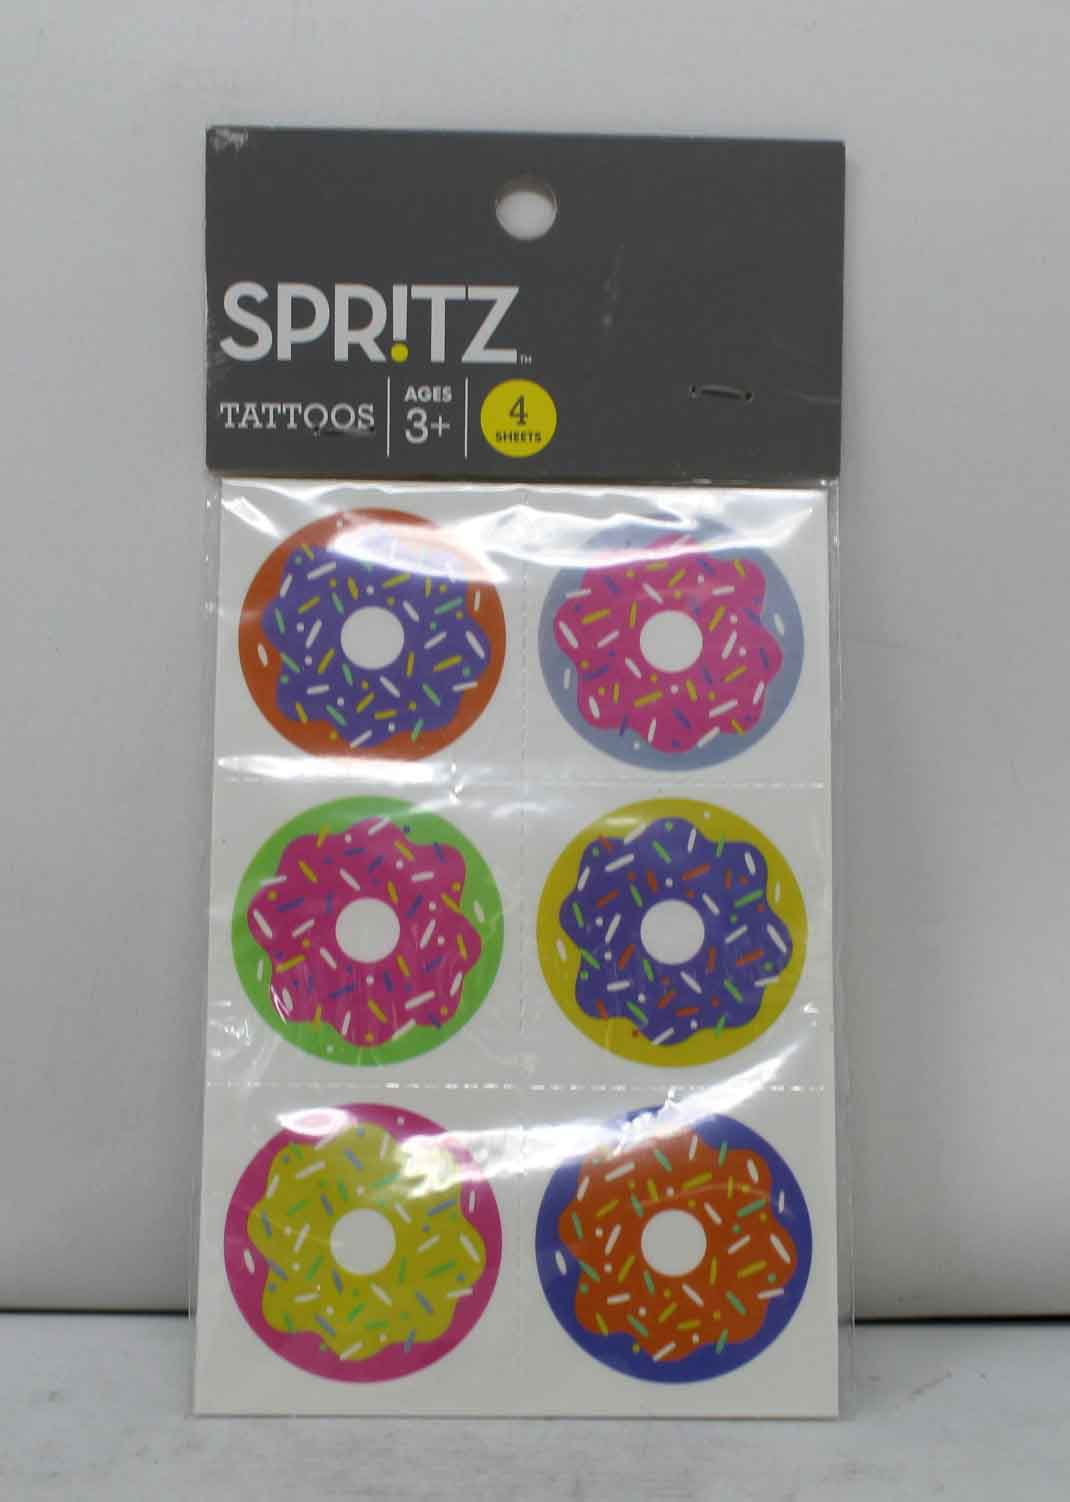 20 Sets of Spritz Donuts Tattoos 3-4 Sheets Great for Goodie Bags for sale online 